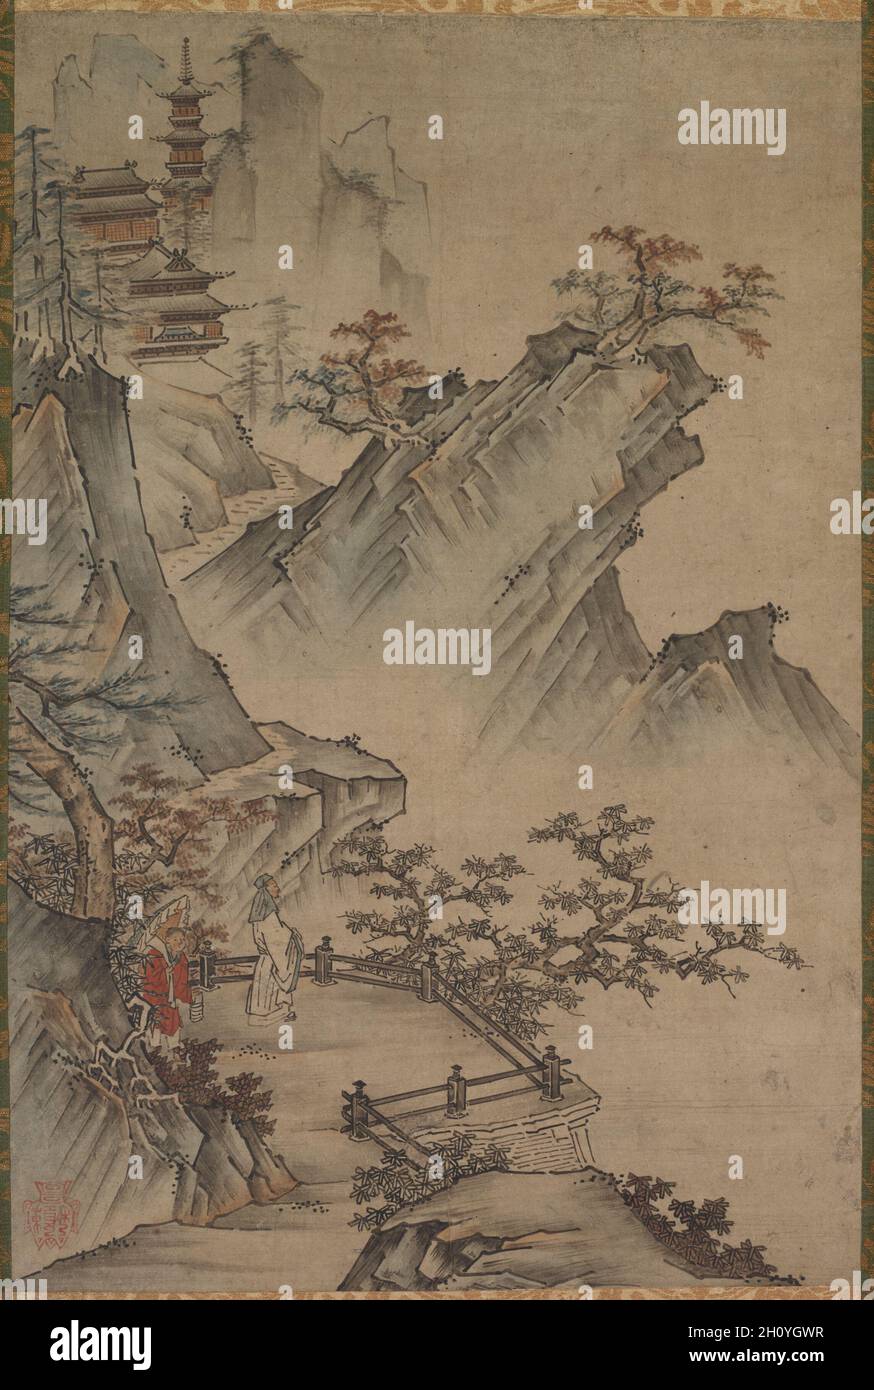 Chinese Literatus Viewing a Valley, possibly mid- to late 1500s–1600s. Japan, Muromachi period (1392-1573) to Edo period (1615-1868). Hanging scroll; ink and light color on paper; mounted: 137 x 46.3 cm (53 15/16 x 18 1/4 in.).  This painting depicts a well-recognized scene in East Asian painting most often associated with the Chinese Southern Song dynasty painter Ma Yuan: a figure, most likely a retired government official, contemplating a high mountain valley from a scenic overlook. The lower left corner of the painting has a tripod-shaped seal resembling that of Kano Hideyori. The work appe Stock Photo